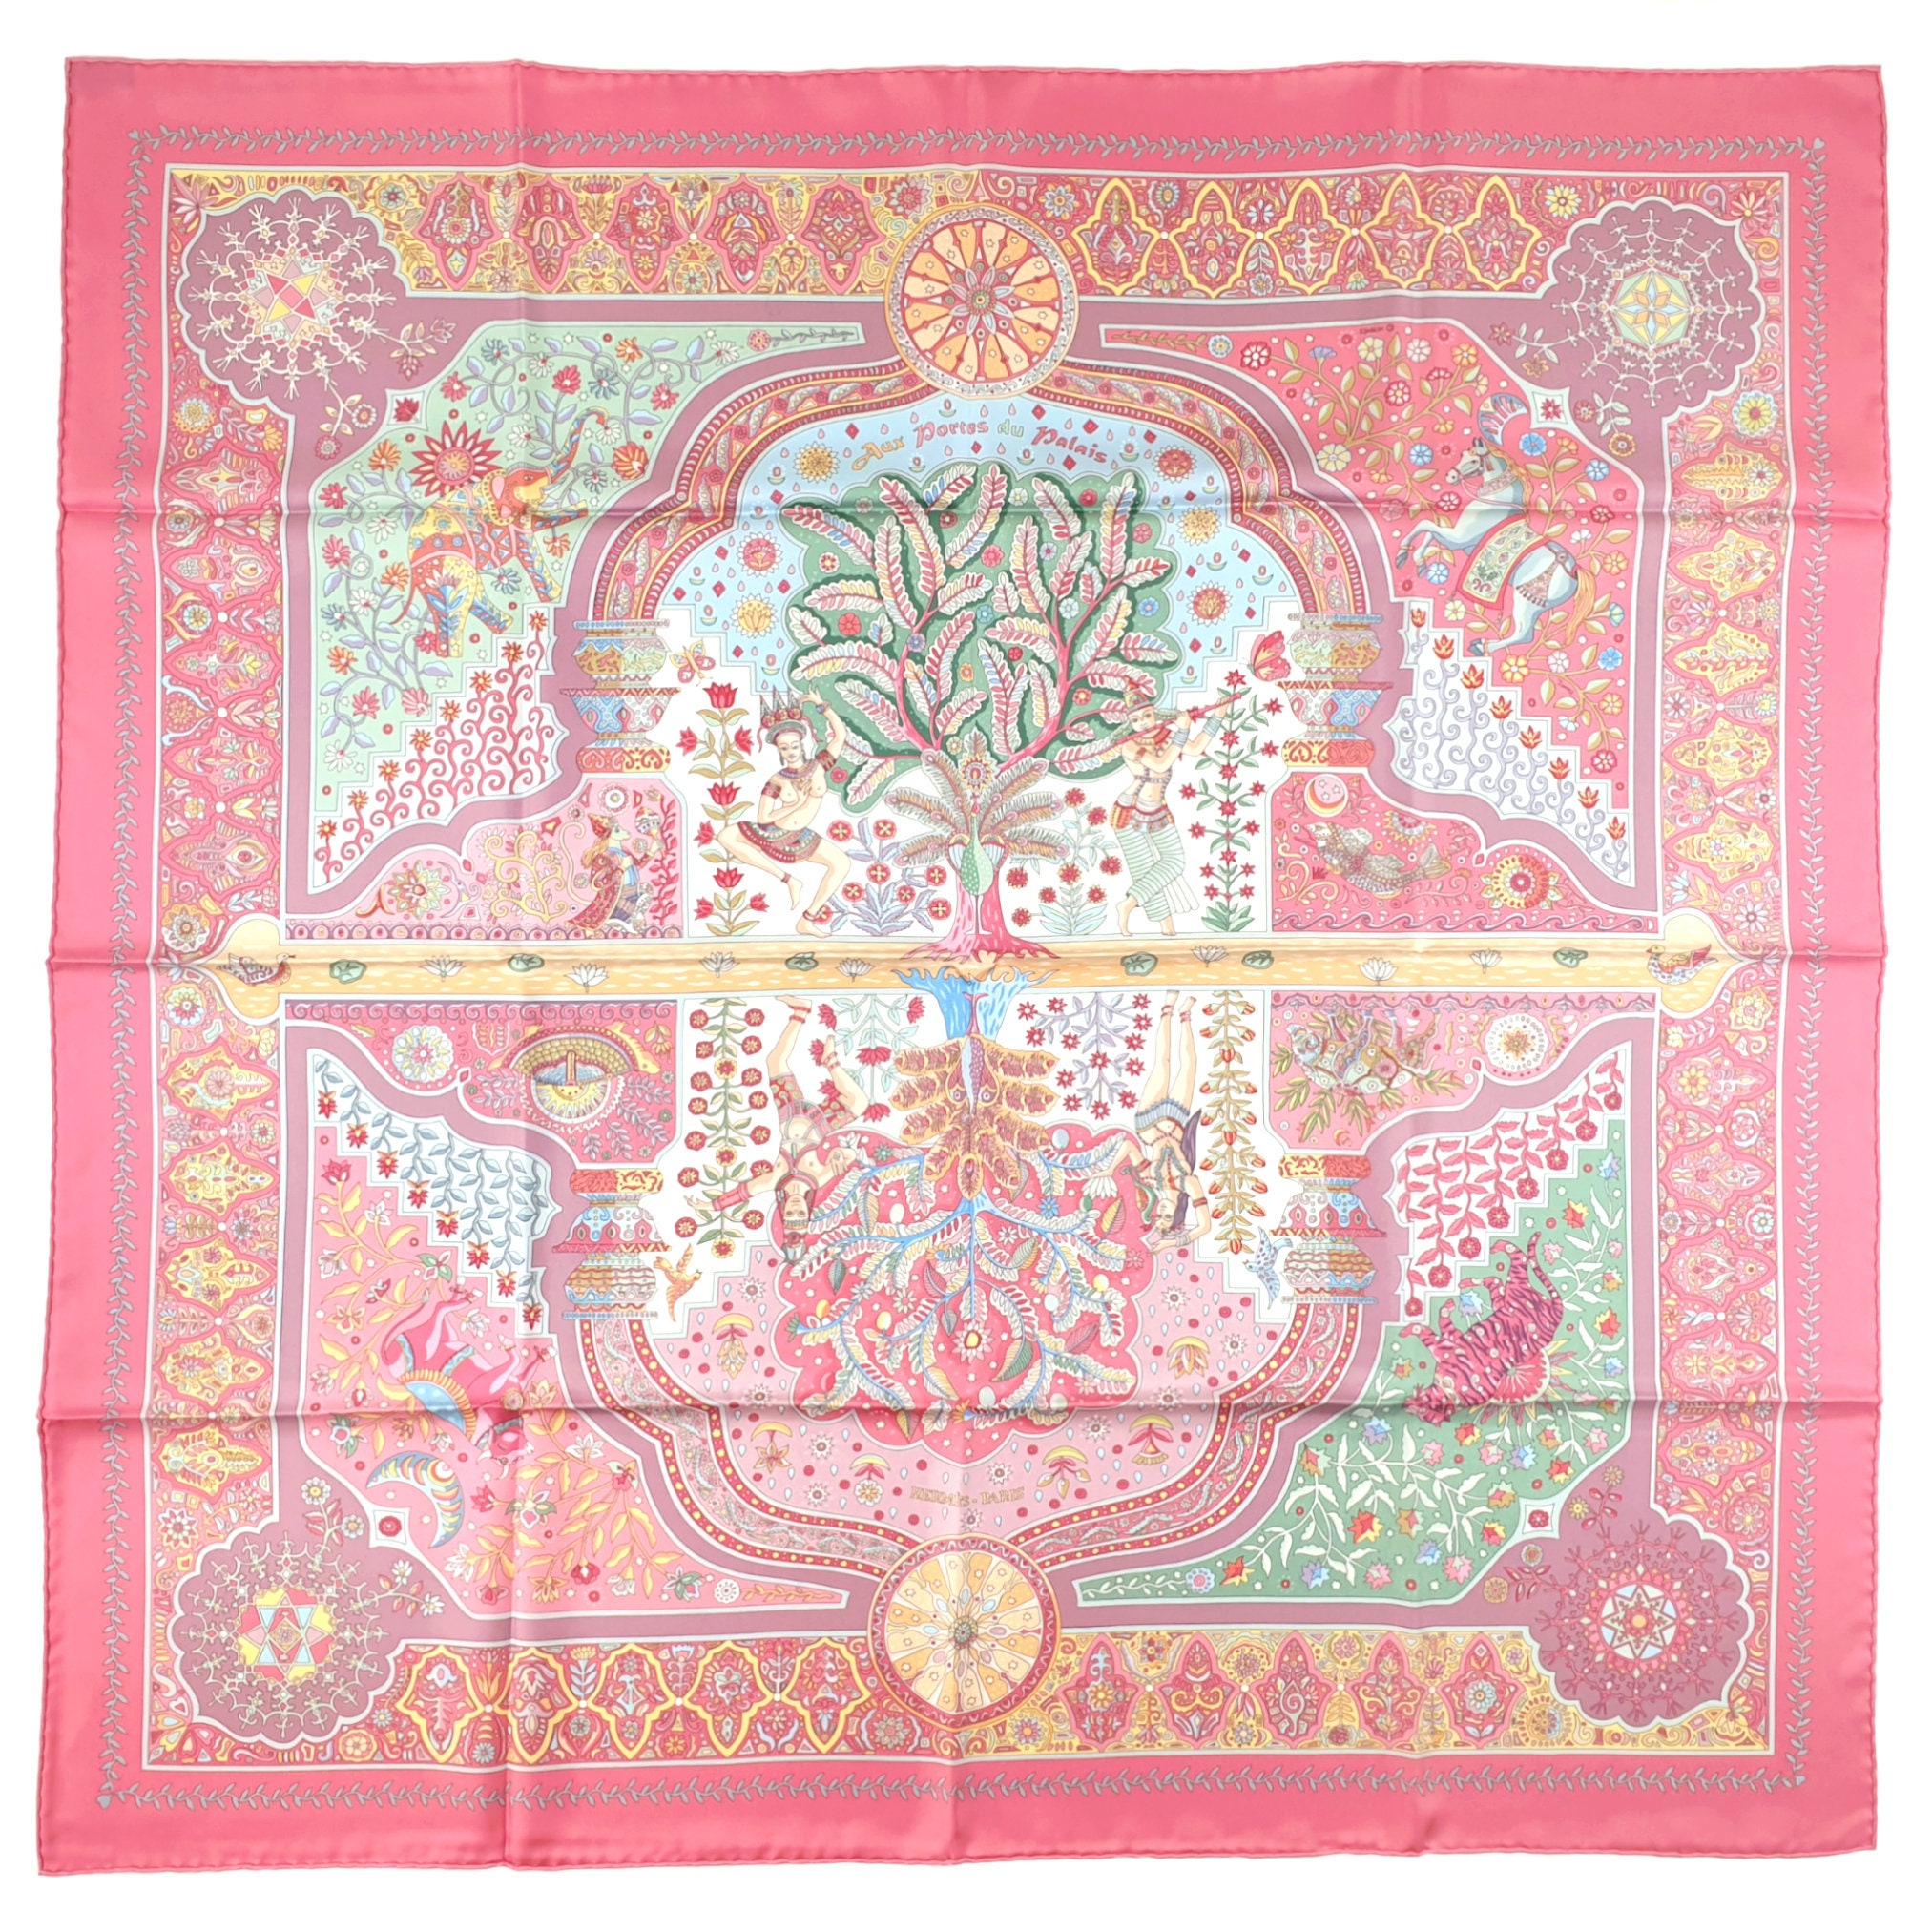 Buy Cheap HERMES Scarf #99925442 from